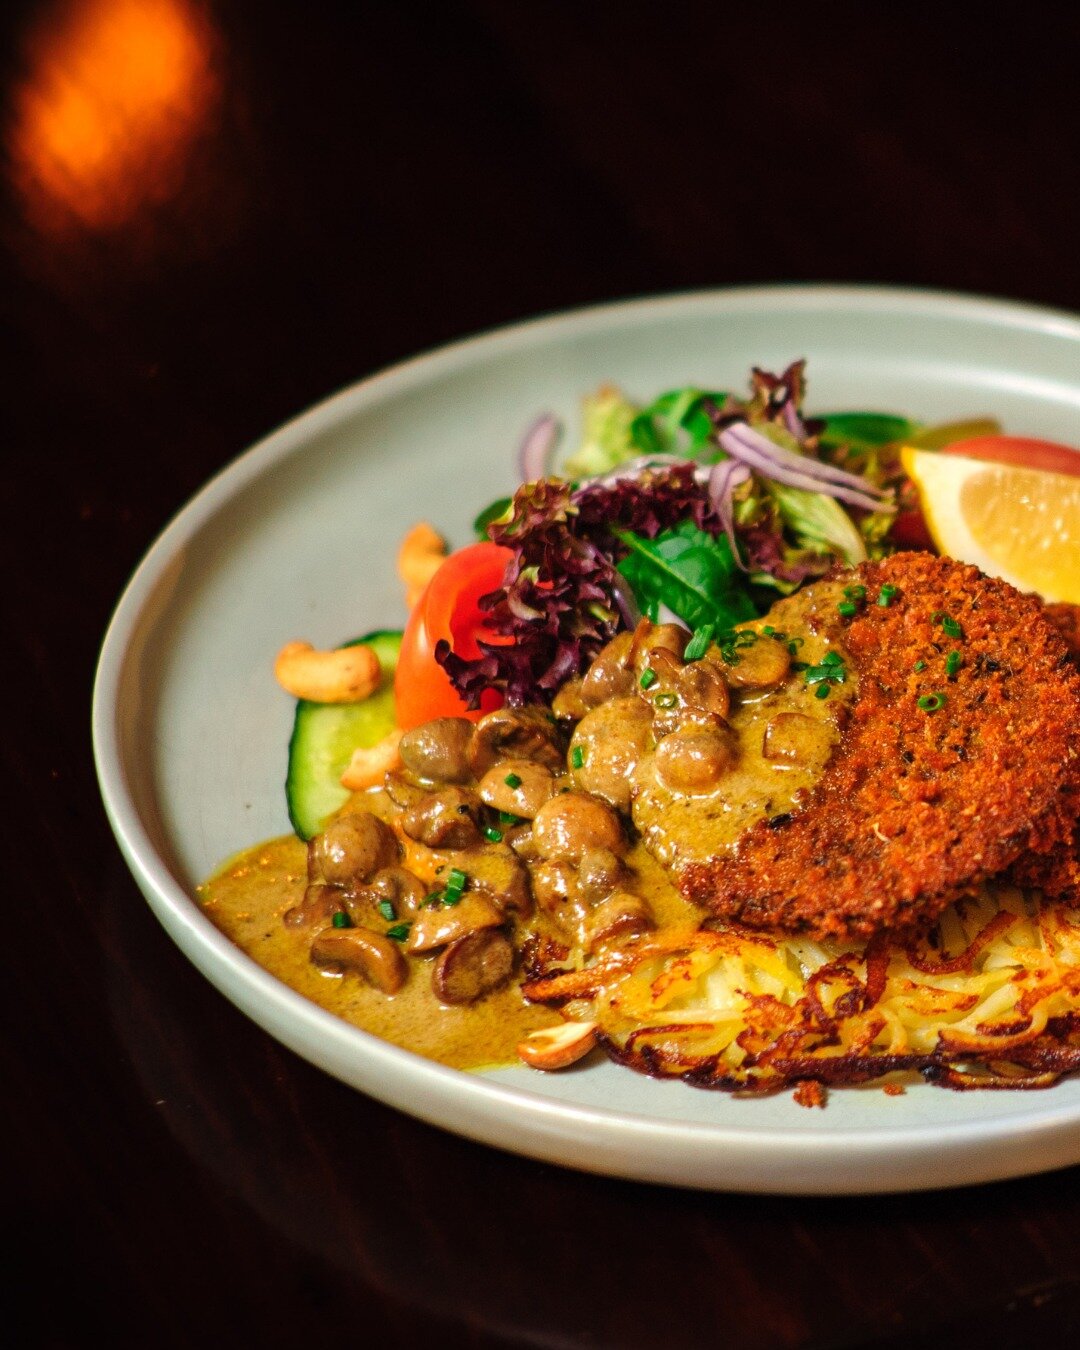 CRUMBED EGGPLANT ~ served with mushroom, basil cream sauce or tomato, mushroom and olive ragu, rosti potato and salad (v, vg)

Serving Dinner 6 nights from 5.30pm (excl. Tuesday)
Lunch &amp; High Tea, Weekends from midday.

Bookings at avalonkatoomba